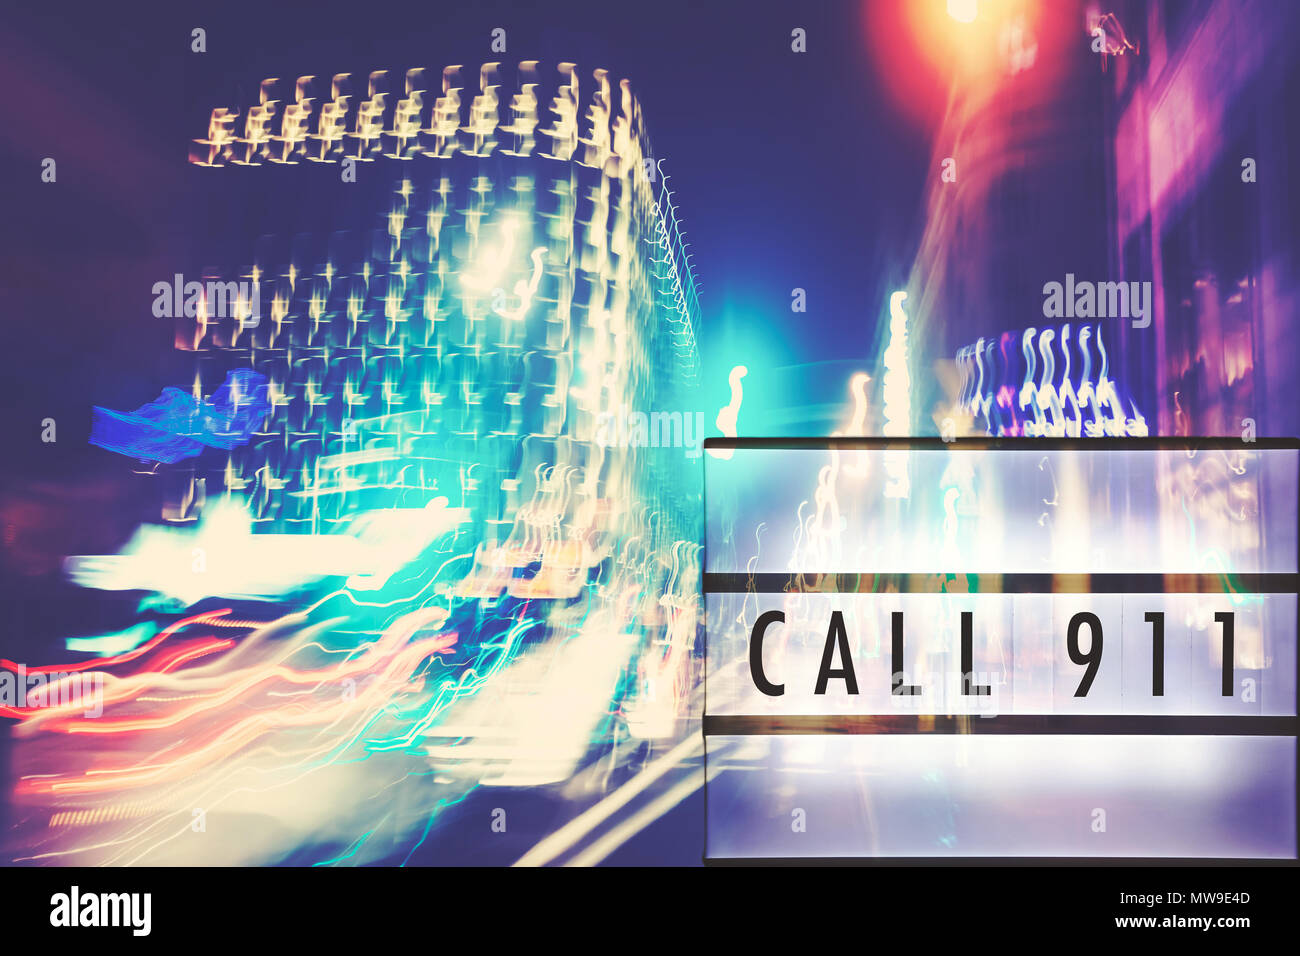 Call 911 text in a lightbox, motion blurred city lights in background, color toned picture. Stock Photo